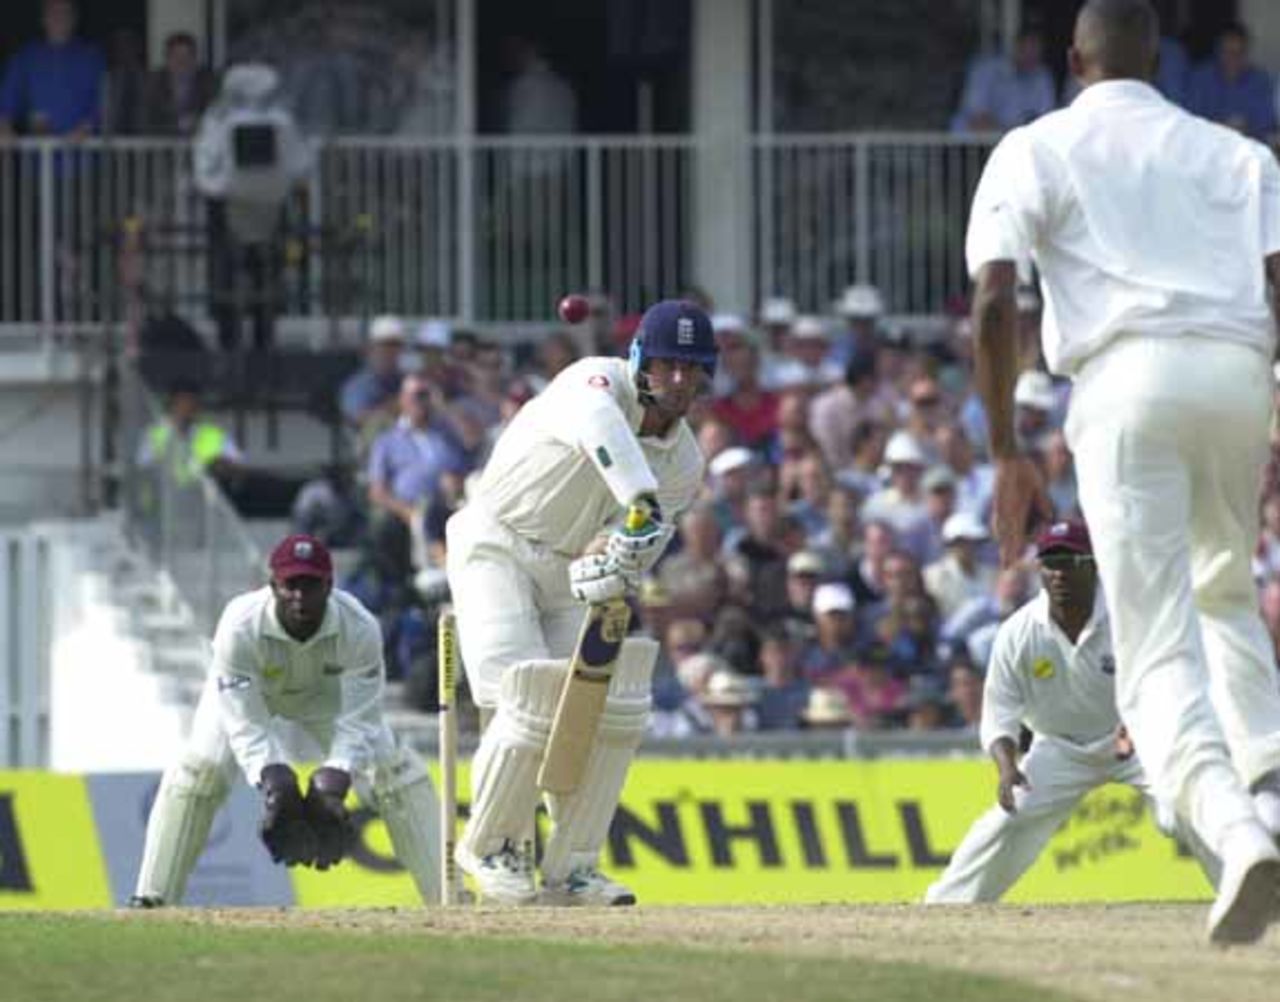 England v West Indies at the Oval, 2000